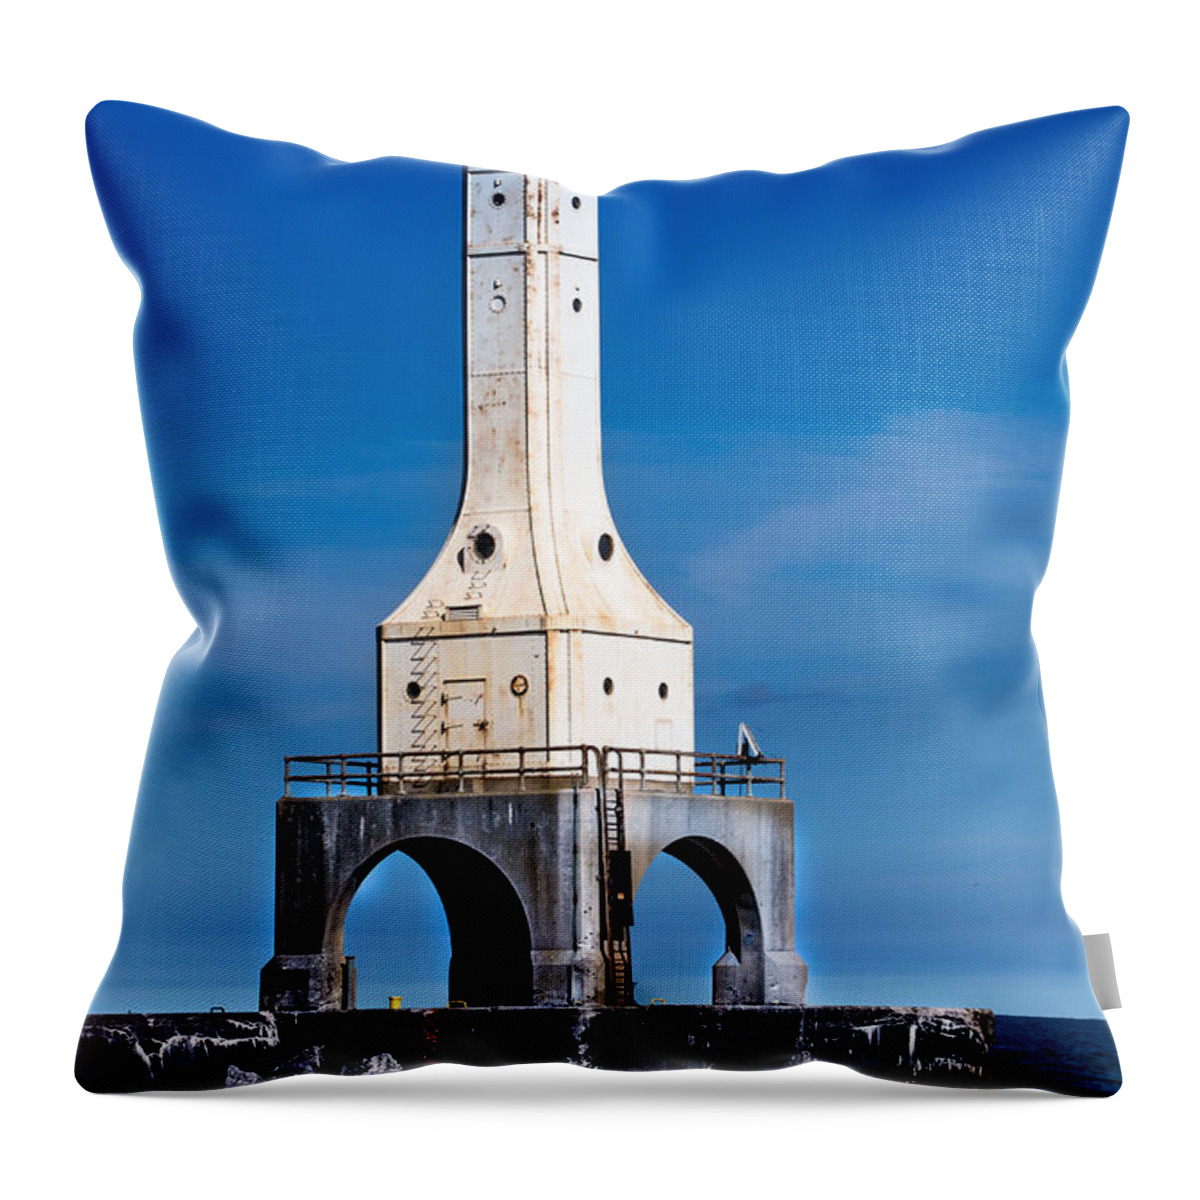  Throw Pillow featuring the photograph Lighthouse Blues Vertical by James Meyer